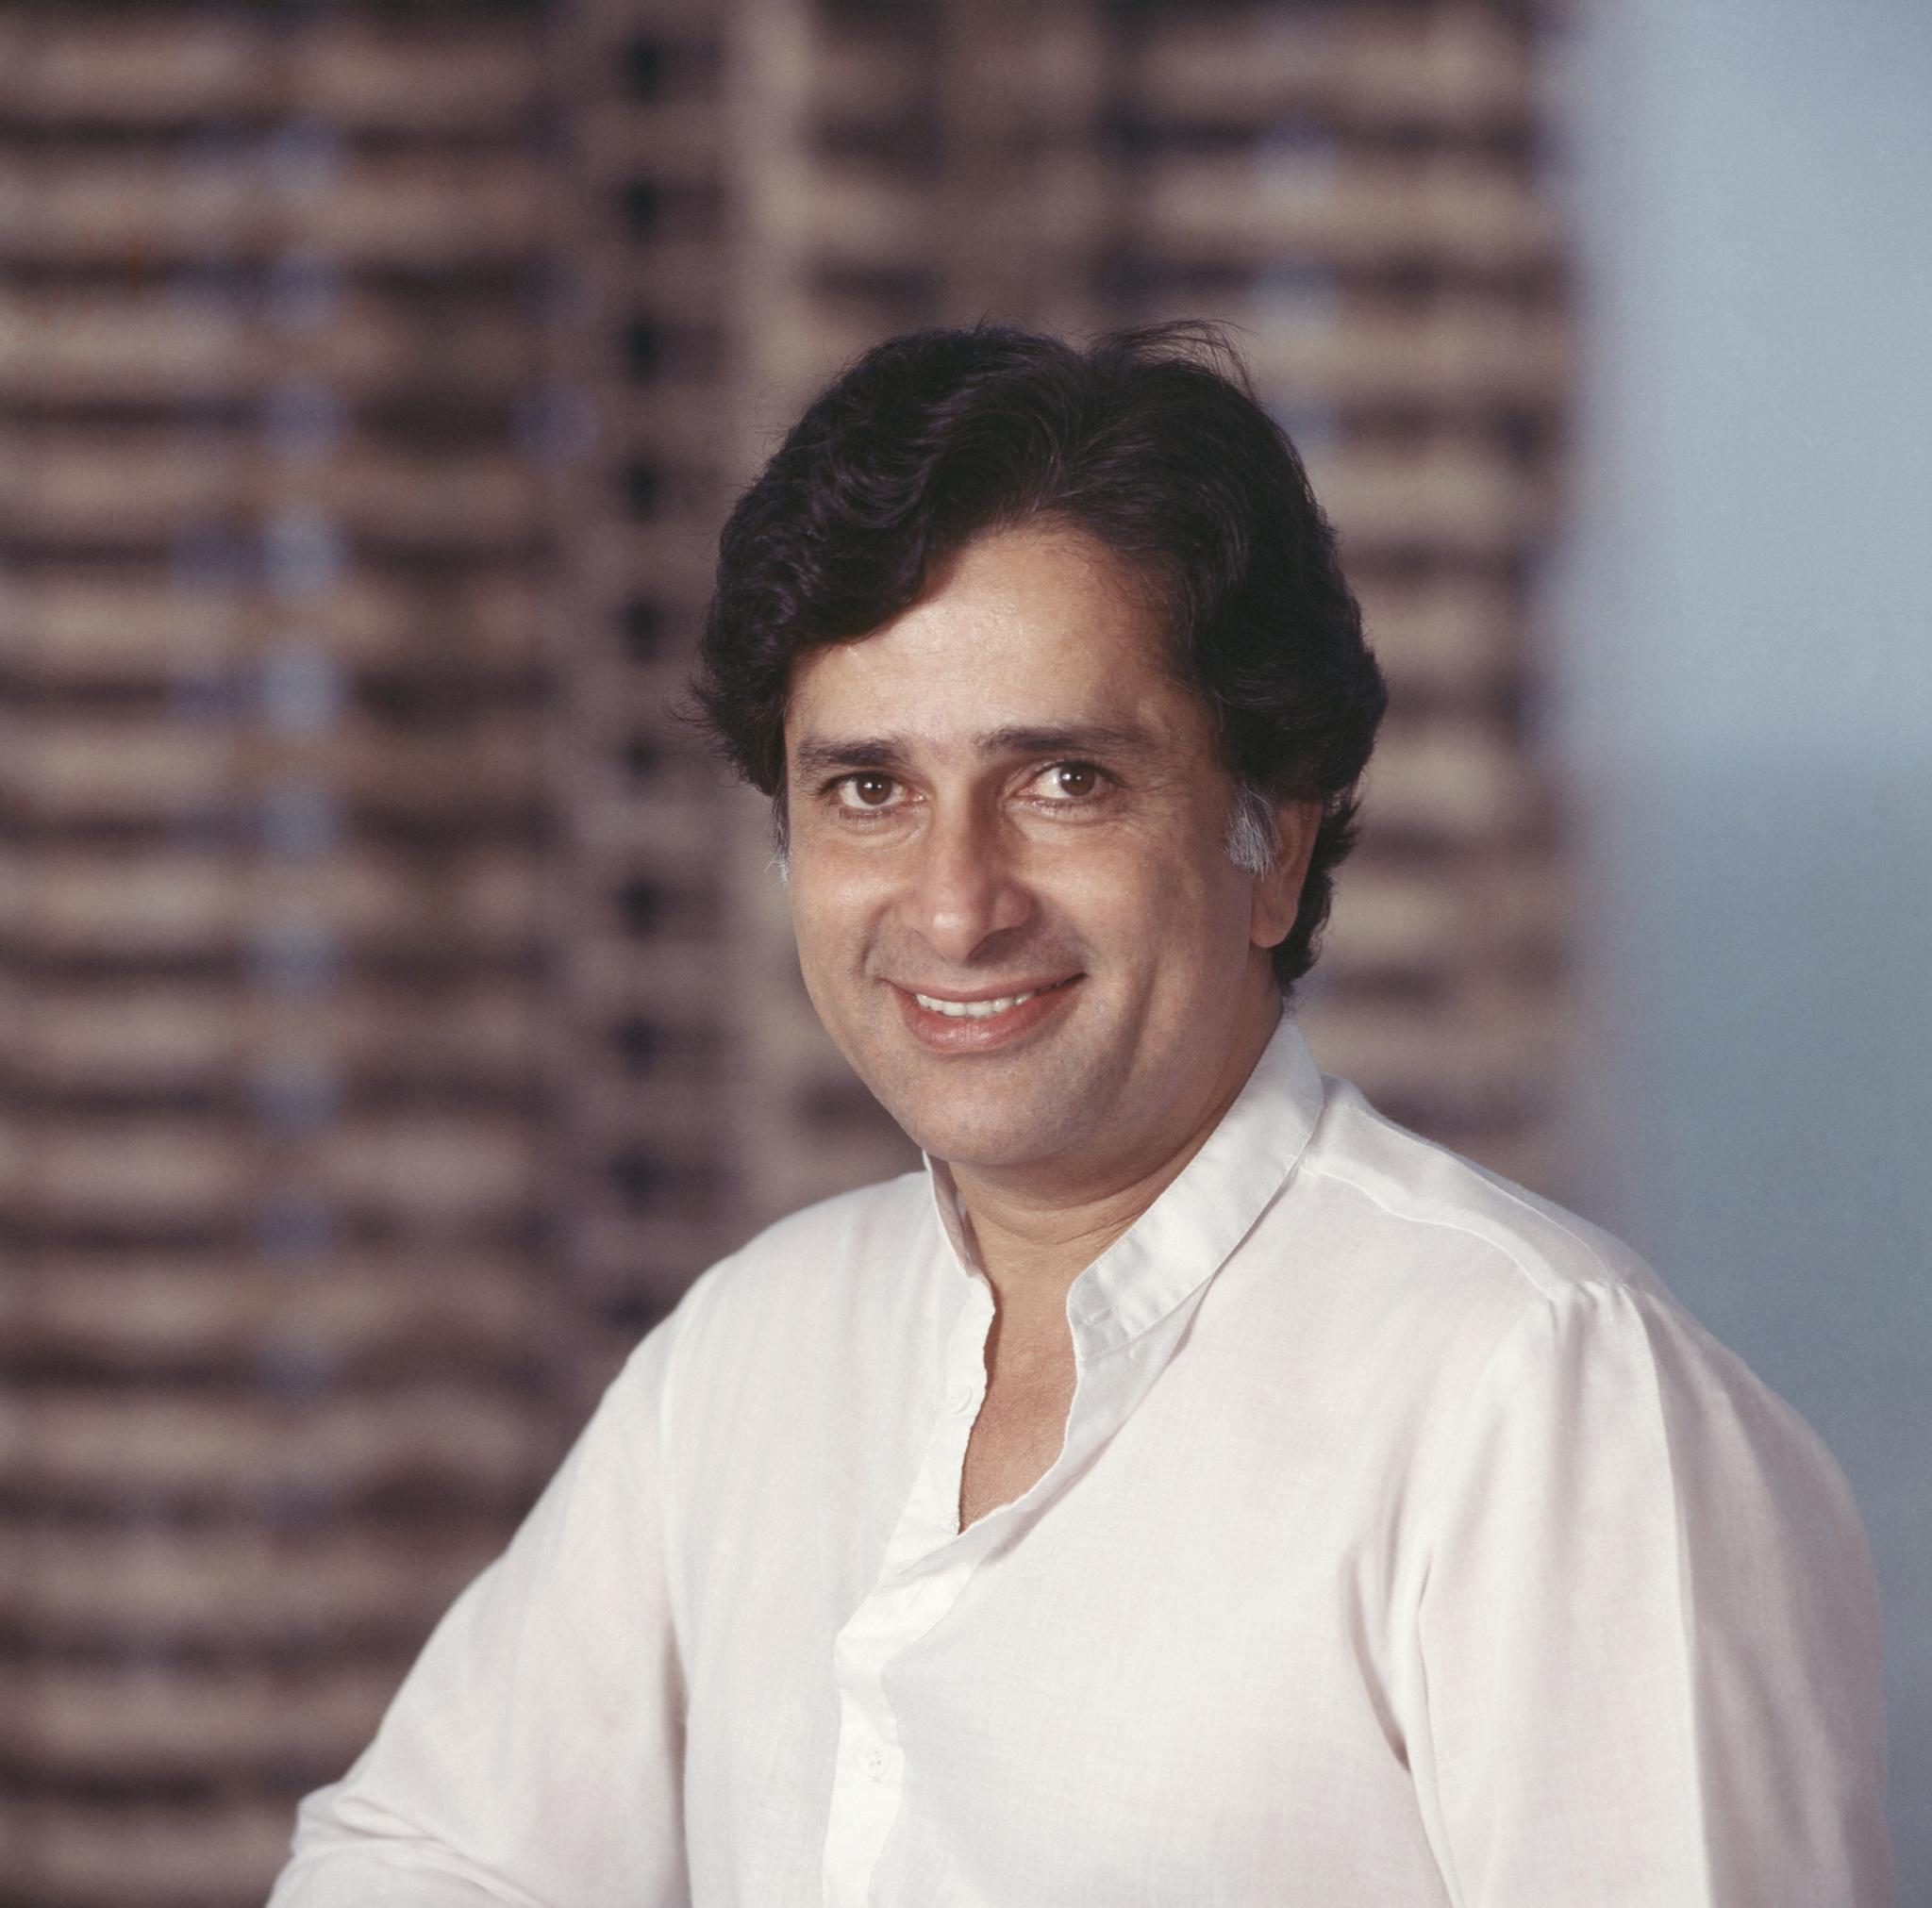 Shashi Kapoor, active from the late '60s to the mid-'80s, delivered blockbusters like 